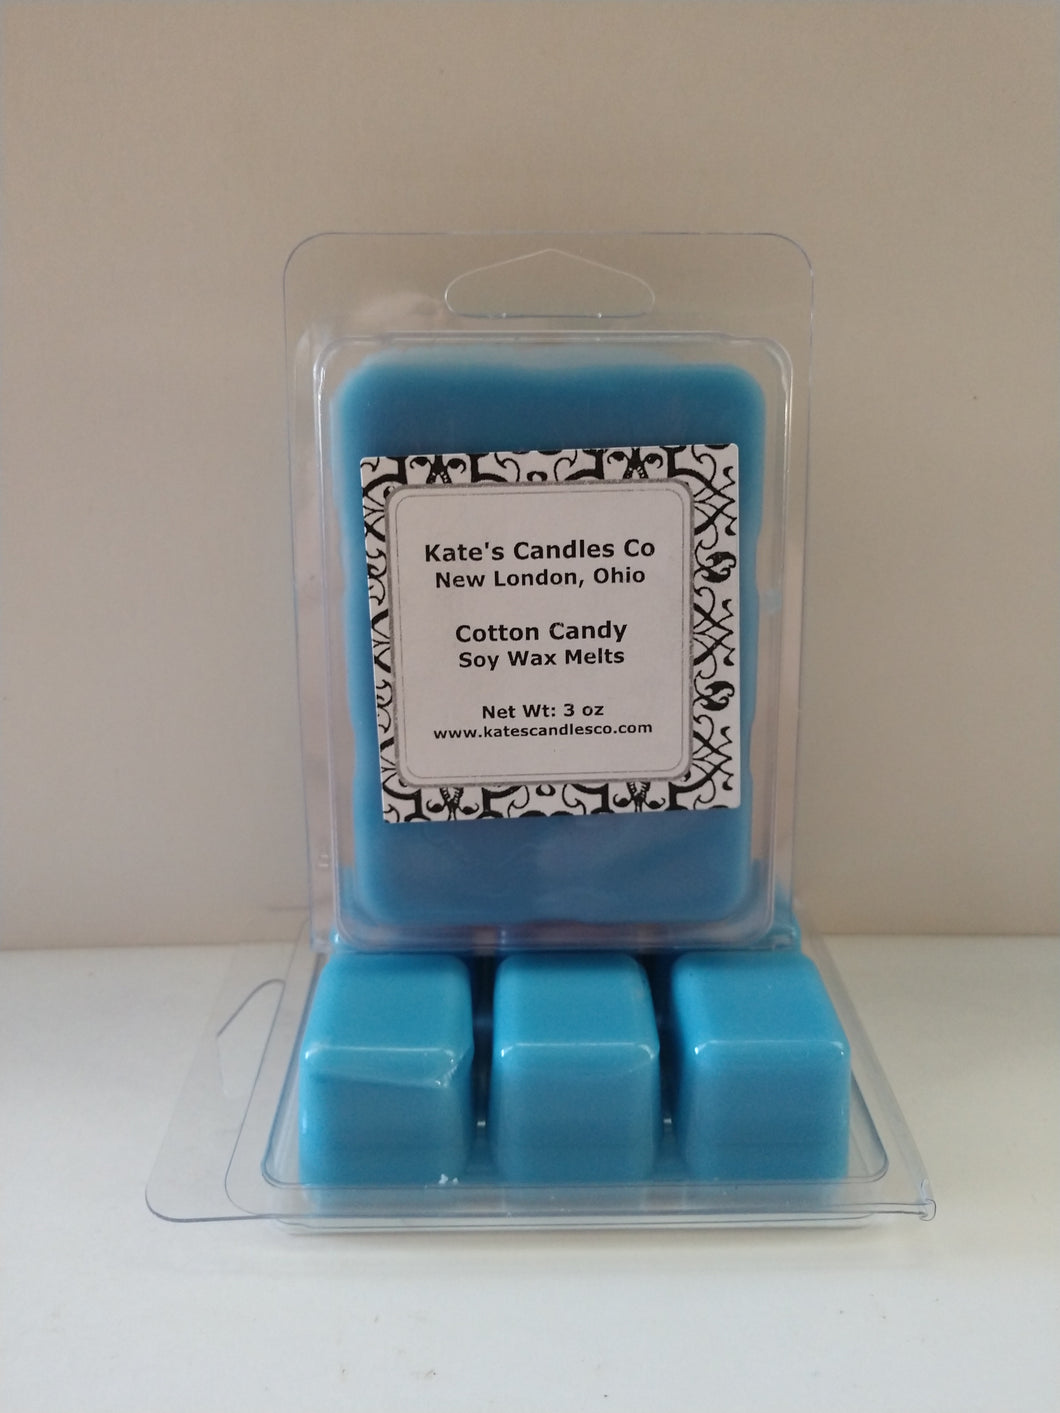 Cotton Candy Soy Wax Melts - Kate's Candles Co. Soy Candles